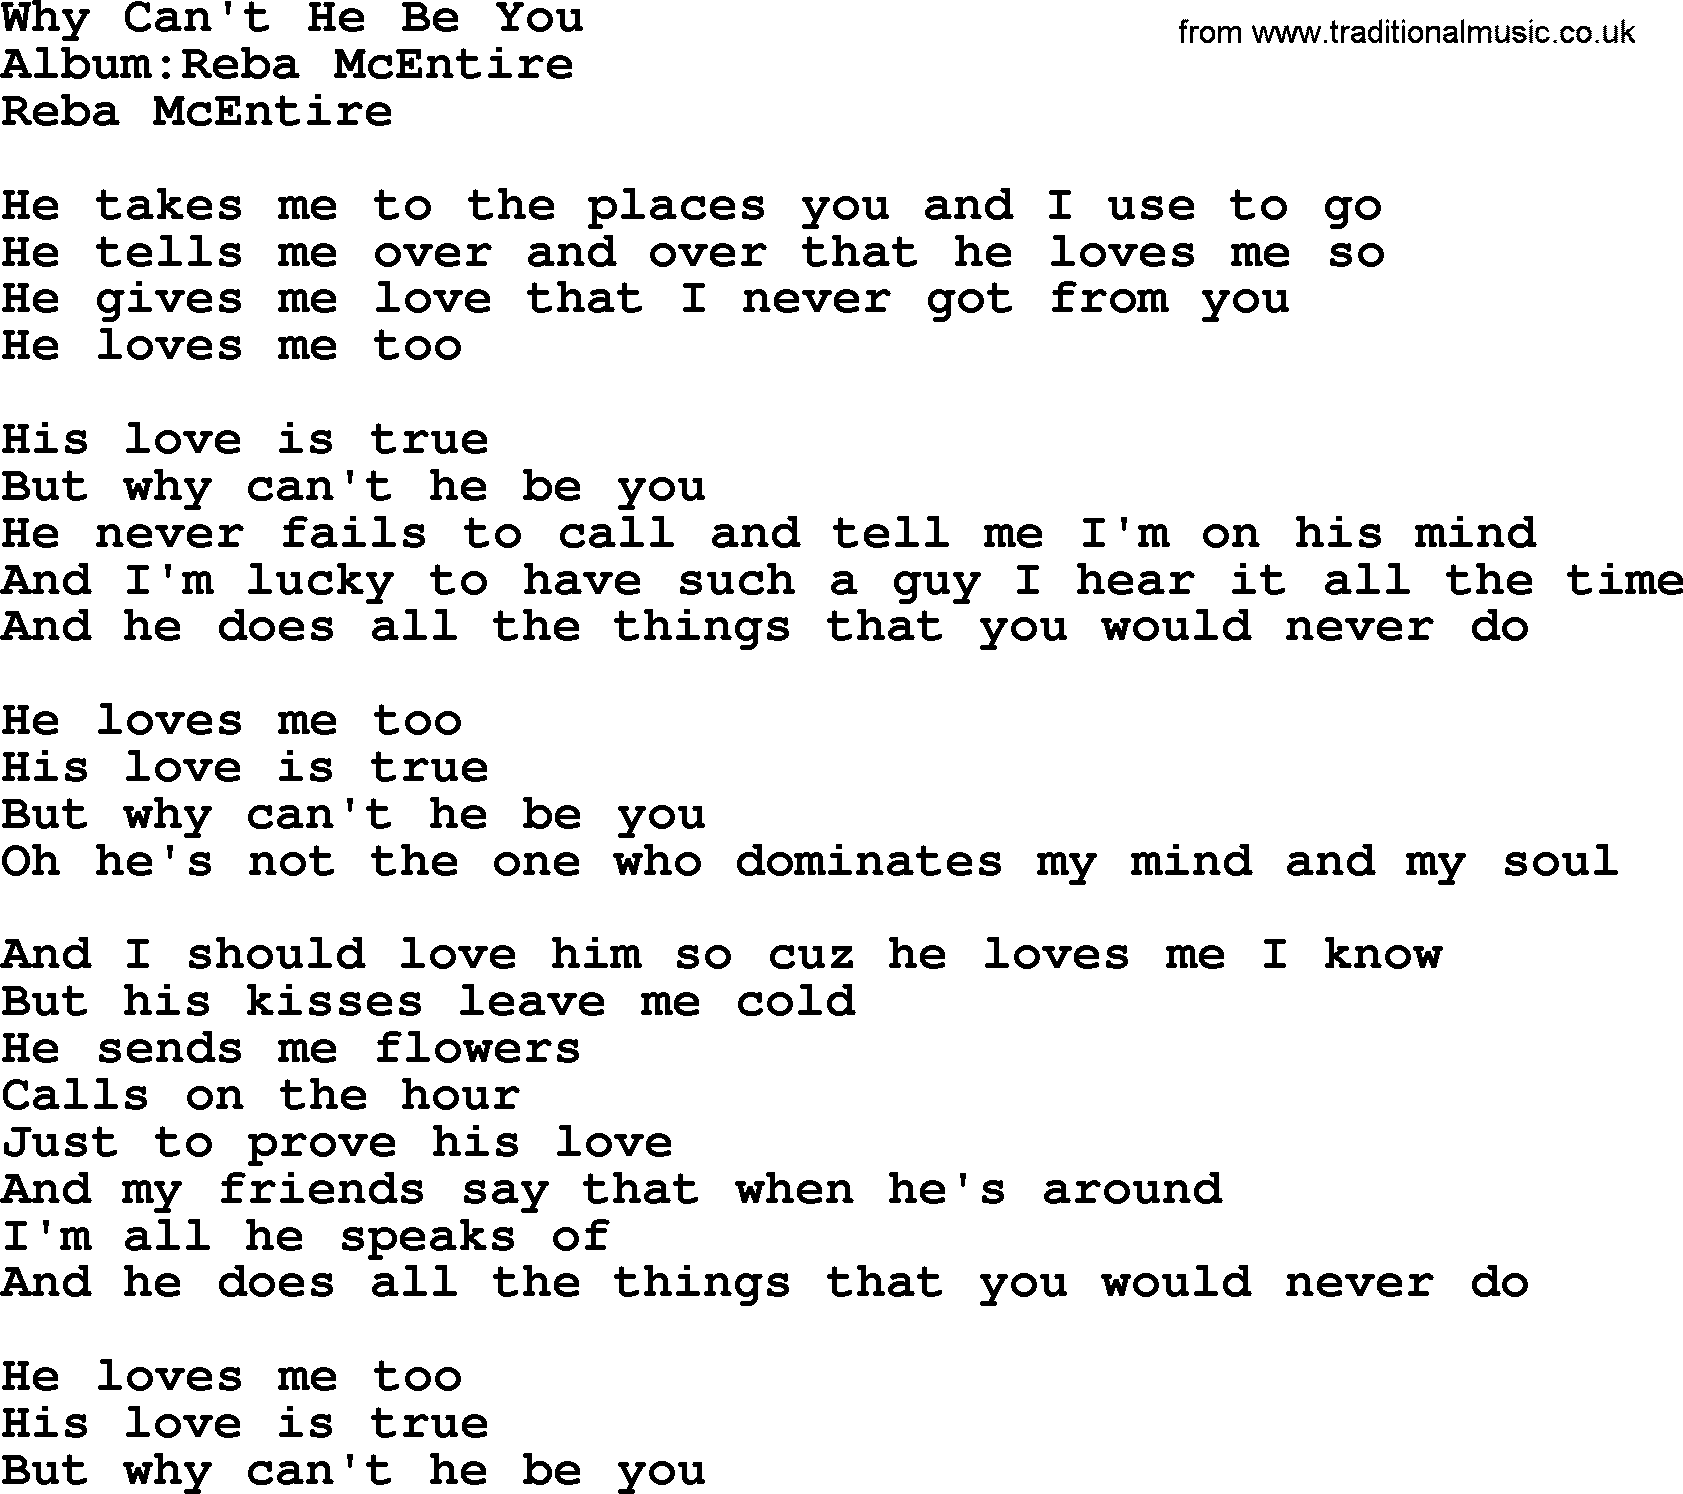 Reba McEntire song: Why Can't He Be You lyrics